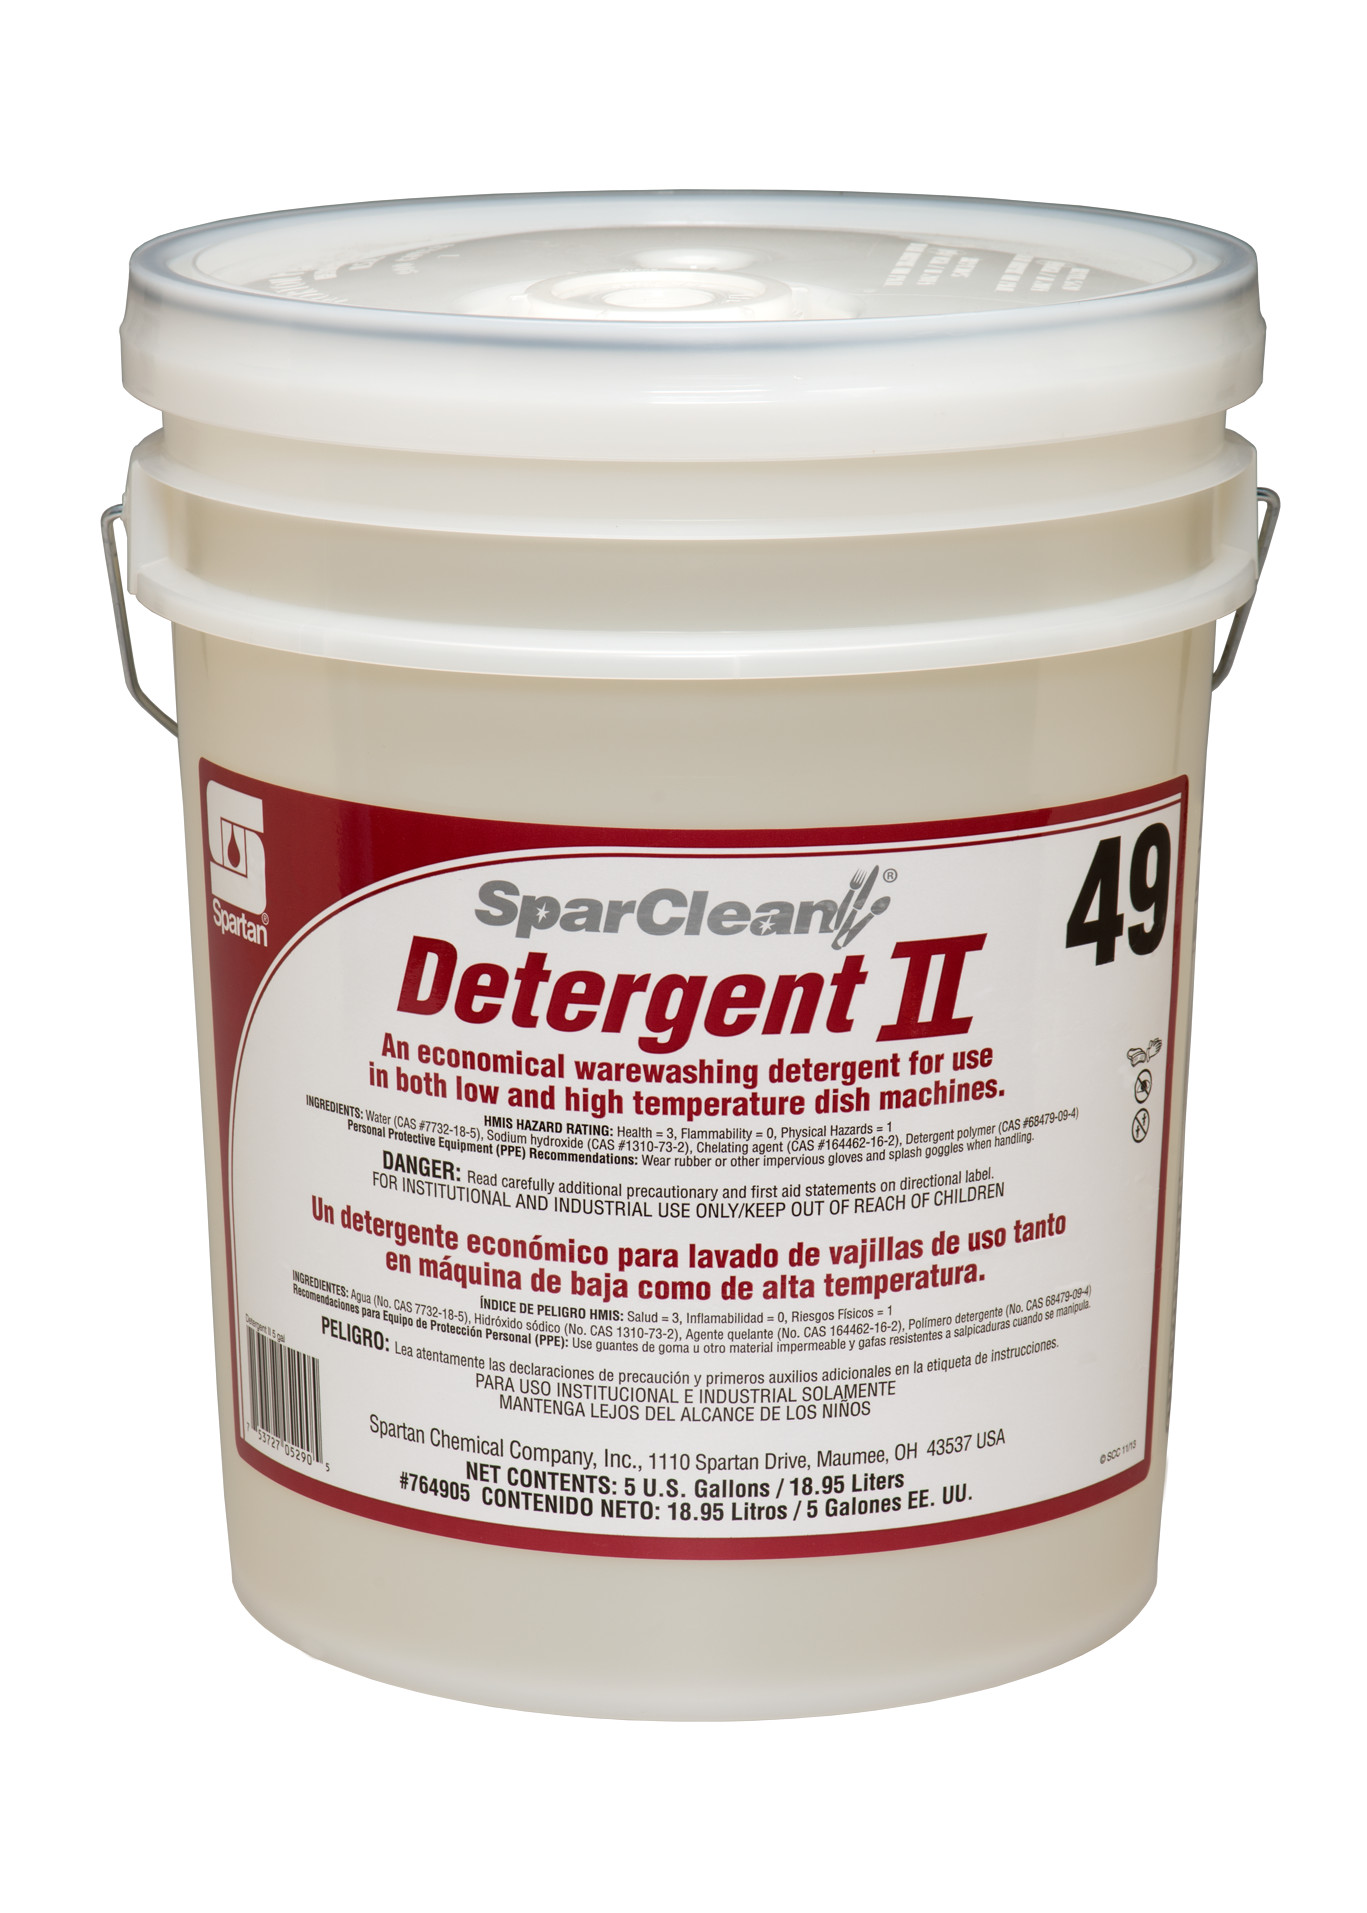 Spartan Chemical Company SparClean Detergent II 49, 5 GAL PAIL